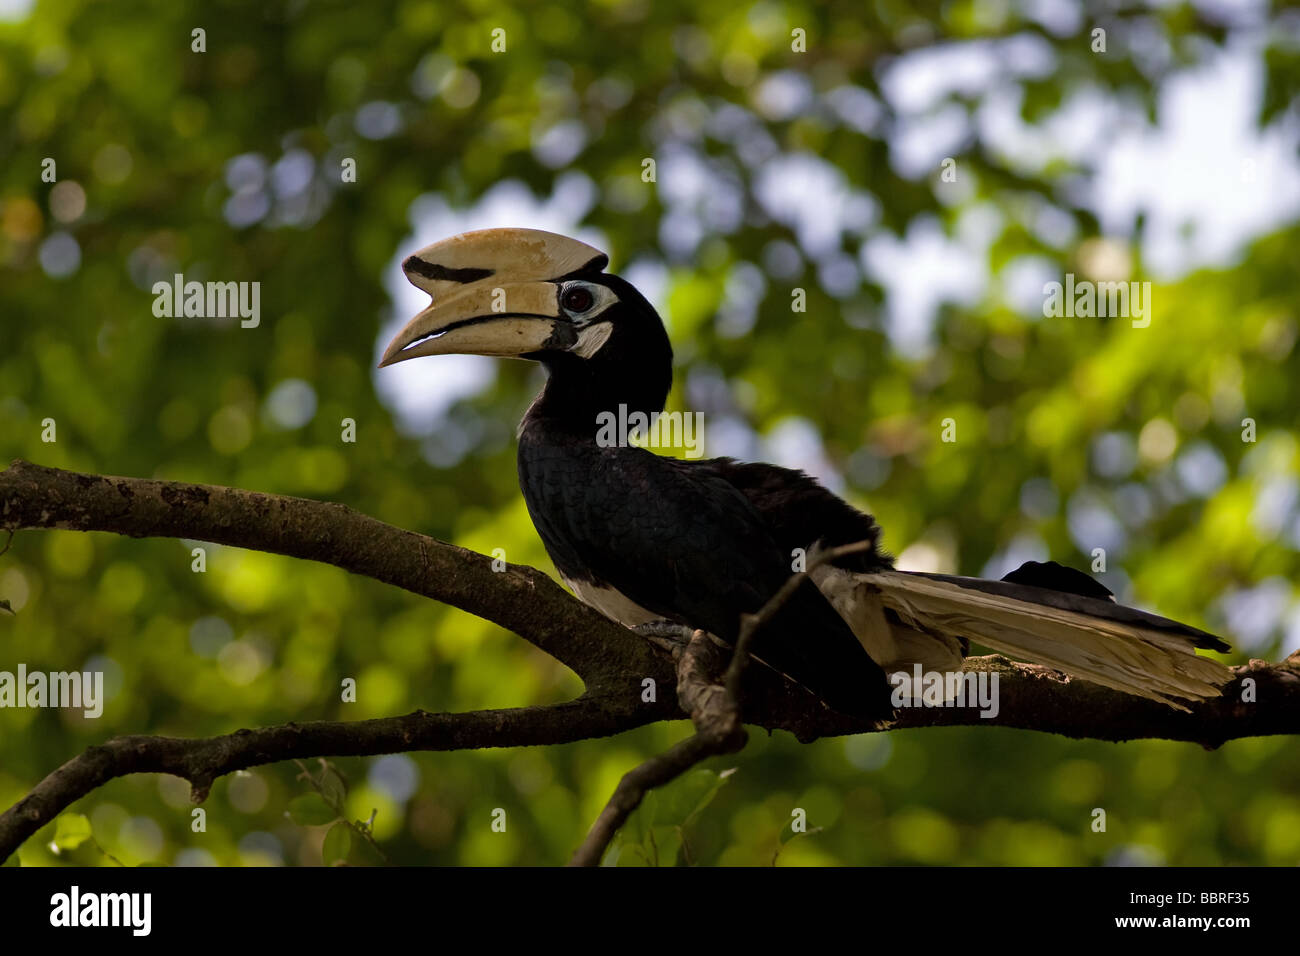 The beautiful and colourful beak seen in Malaysian tropical rainforests This hornbill is eating some local fruits. Stock Photo